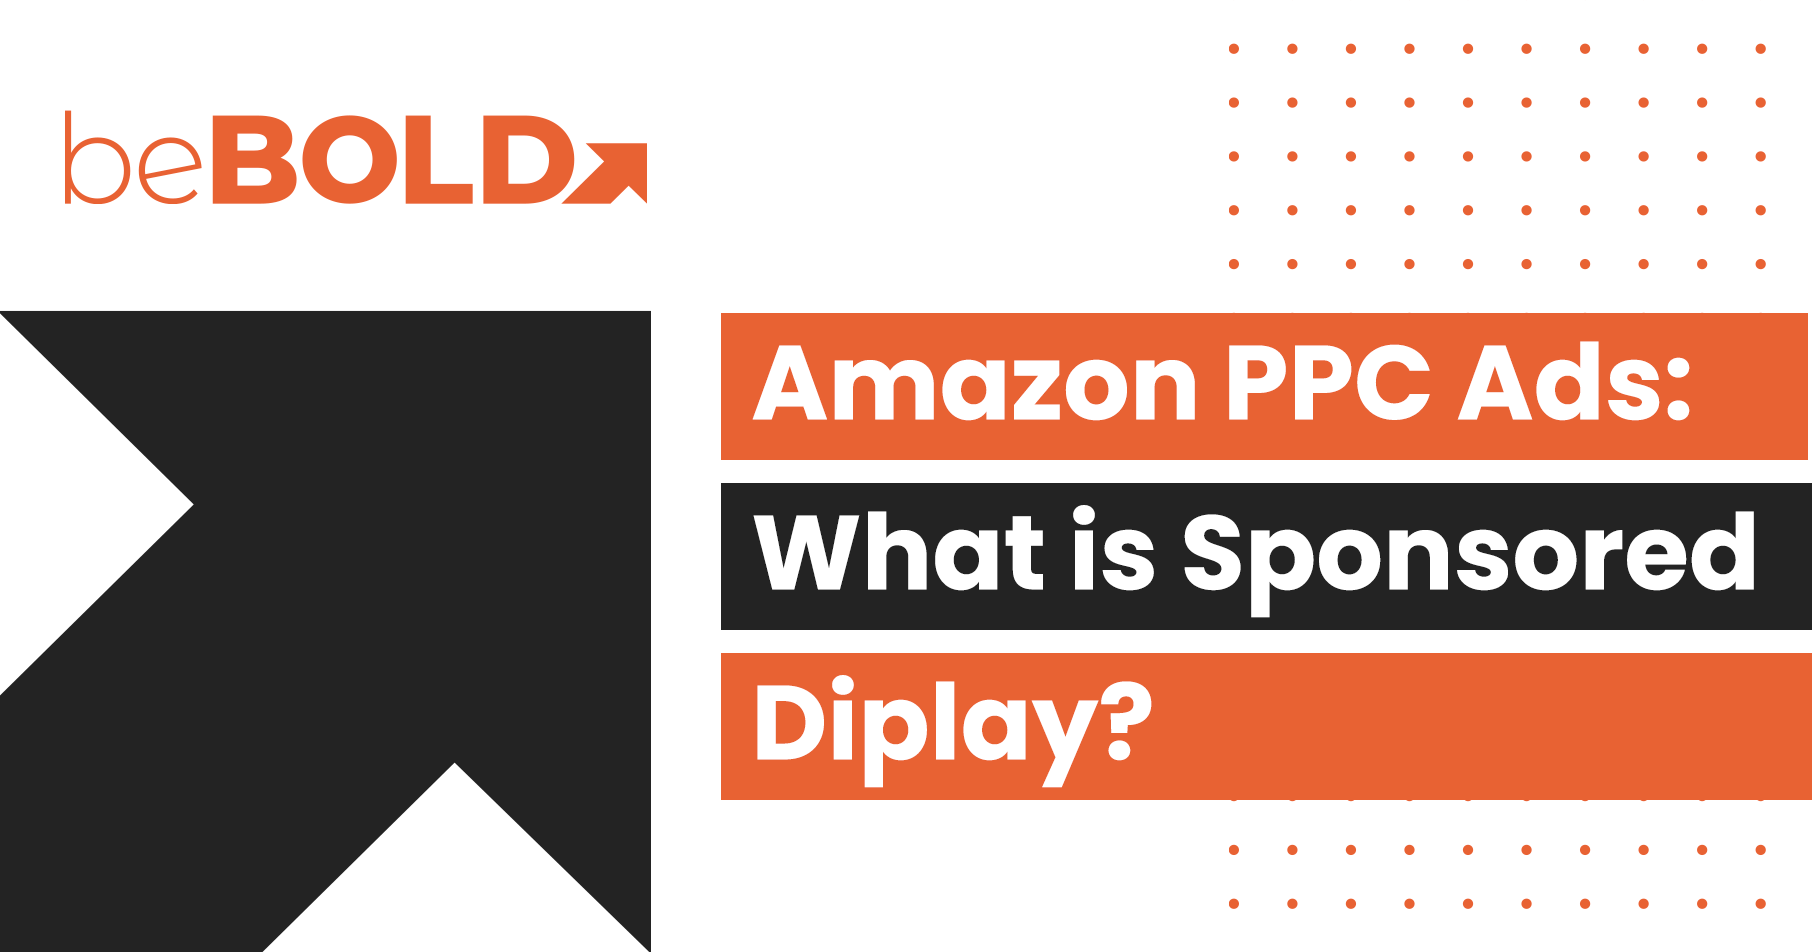 Amazon PPC Ads: What is Sponsored Display?